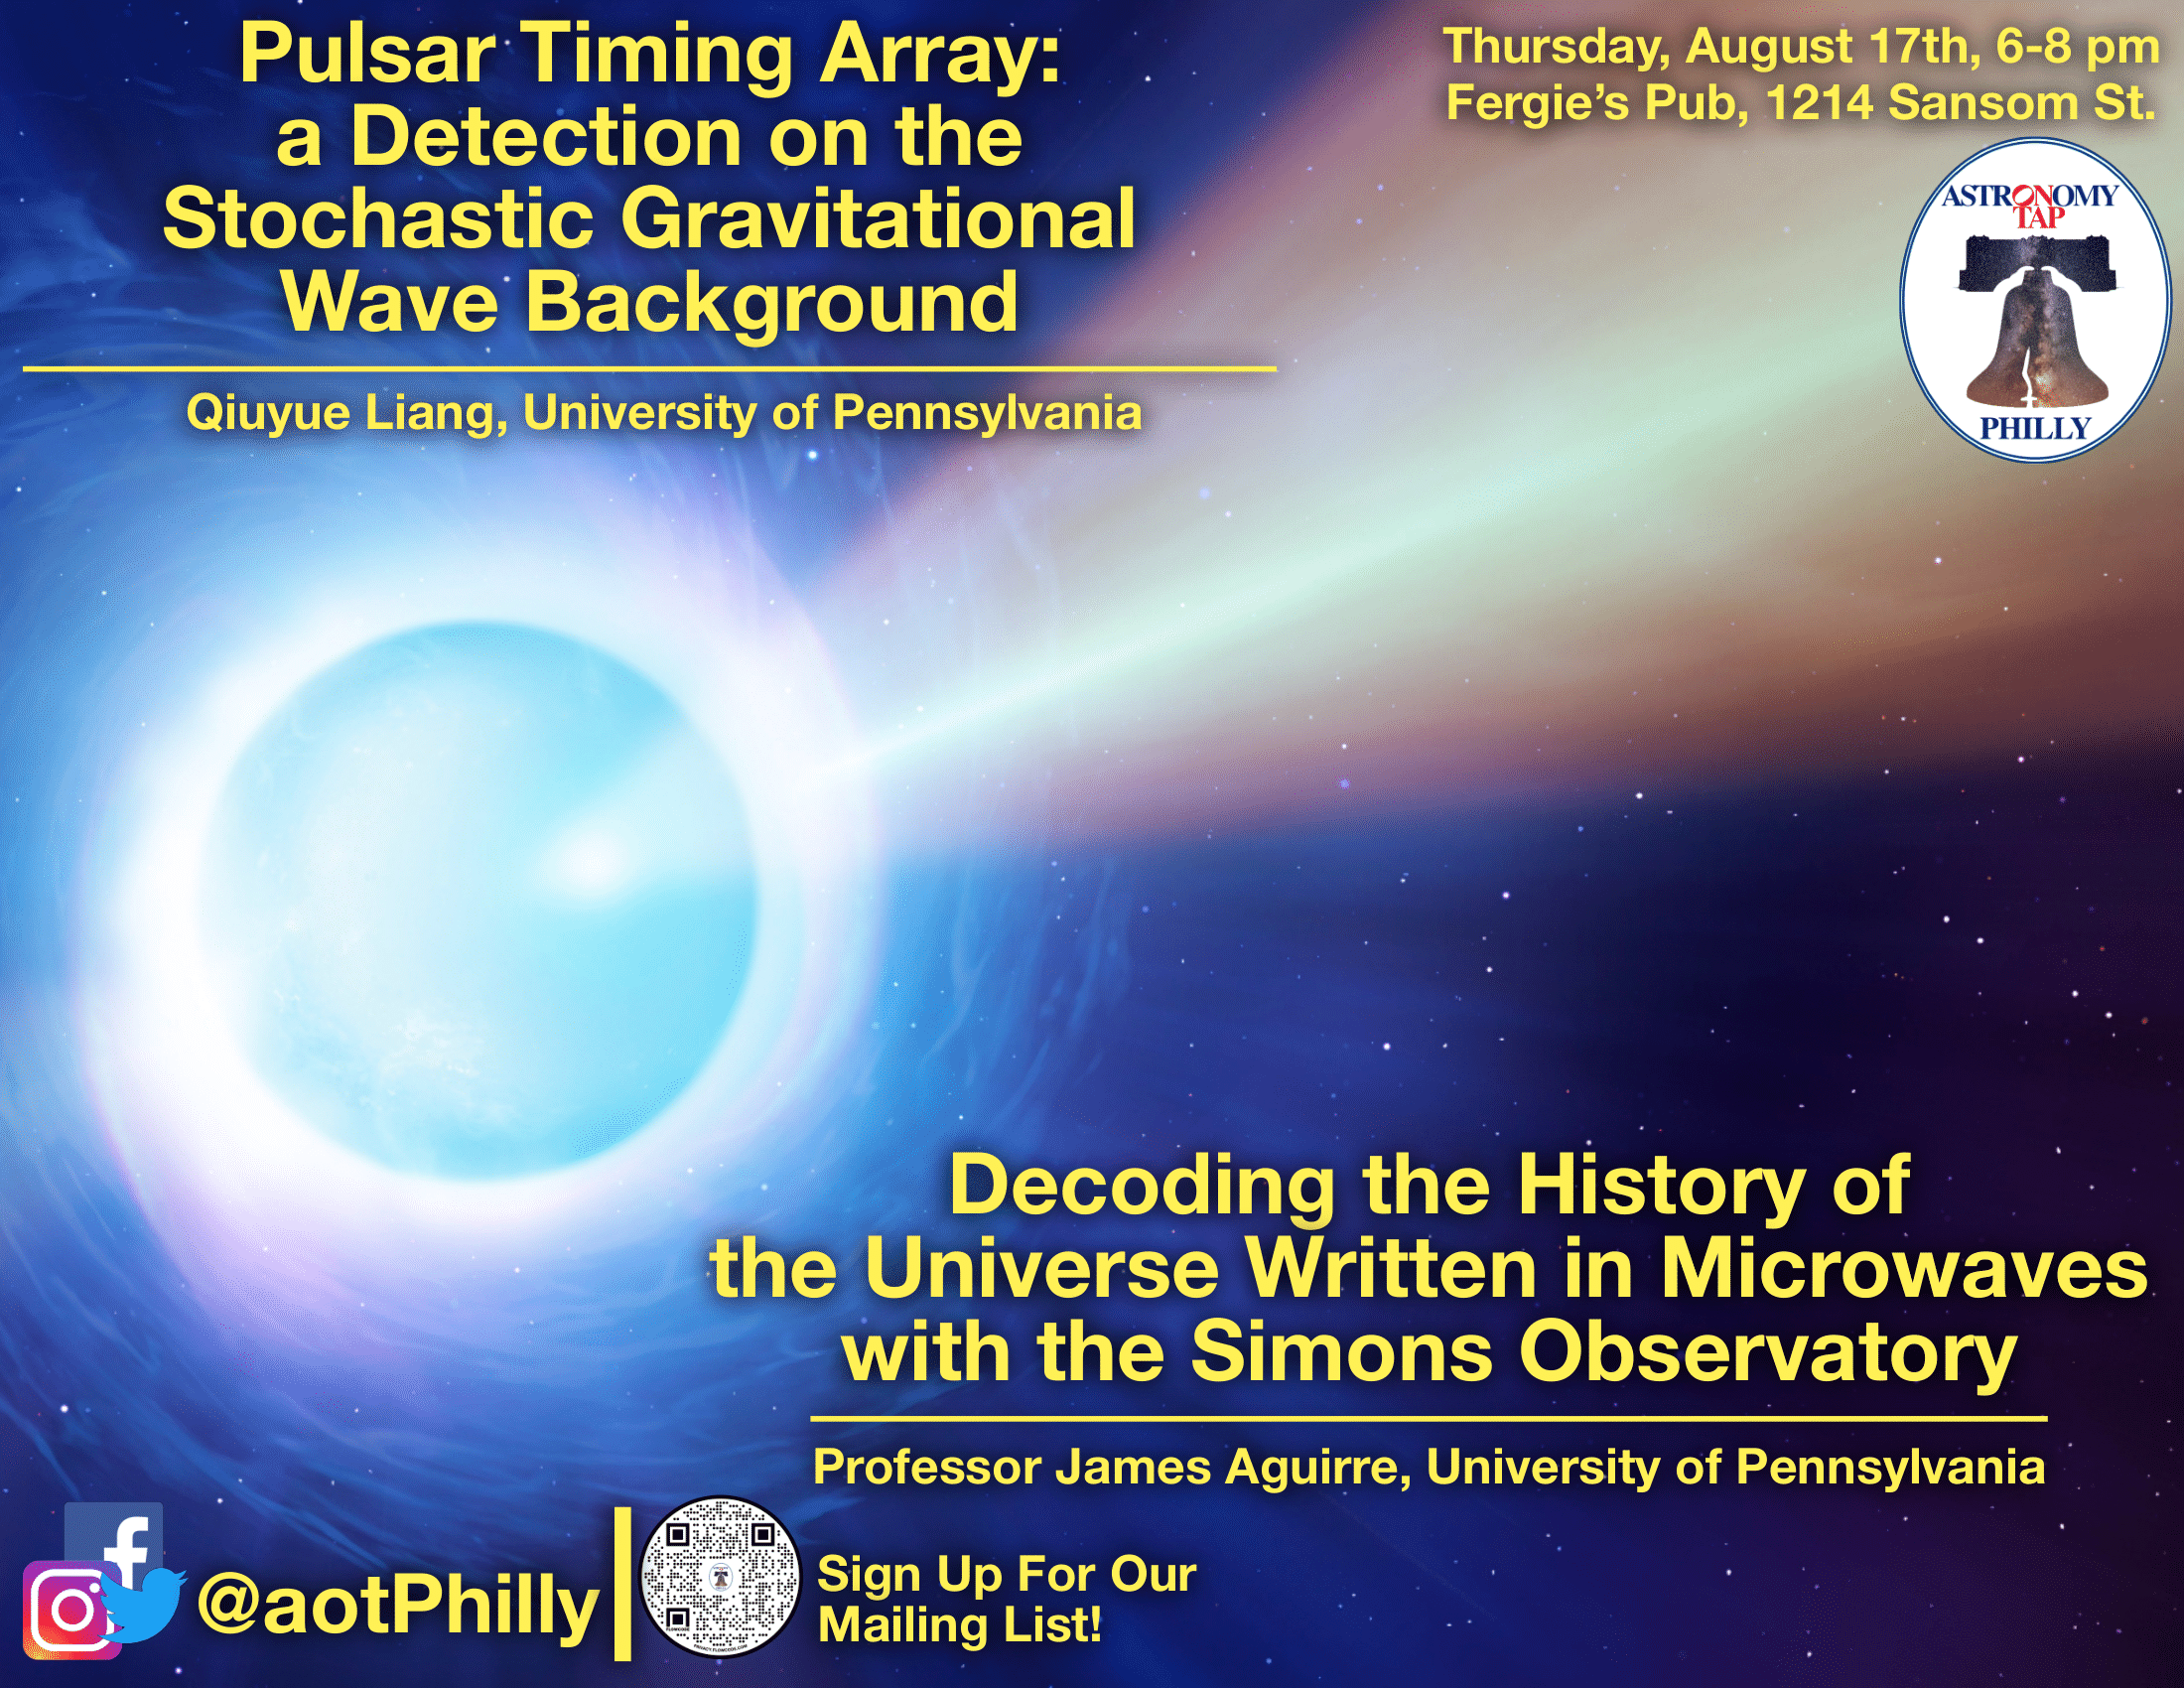 Flyer advertising for Astro on Tap Philly this Thursday, August 17th. The background image of the flyer is a bright pulsar. The pulsar is a shade of blue, and the EM radiation shooting out of its poles is a light orange shade. Large, yellow font in the top lefthand corner says "Pulsar Timing Array: a Detection on the Stochastic Gravitational Wave Background" and just below in smaller yellow font it says "Qiuyue Liang, University of Pennsylvania." In the bottom right, large yellow font says "Decoding the History of the Universe Written in Microwaves with the Simon's Observatory." And just below in smaller yellow font it says "Professor James Aguirre, University of Pennsylvania." In the bottom left corner, it has Astro on Tap Philly's social media handle in yellow font, "@aotPhilly," with a QR code directly to the right of it, with small yellow font saying "sign up for our mailing list!" In the top right corner in small yellow font, it says "Thursday, August 17, 6-8pm Fergie's Pub, 1214 Samson St." With Astro on Tap Philly's logo directly beneath it. The logo is a white oval and in the center is the liberty bell, and above the bell it says "Astronomy on Tap" and below the bell it says "Philly."